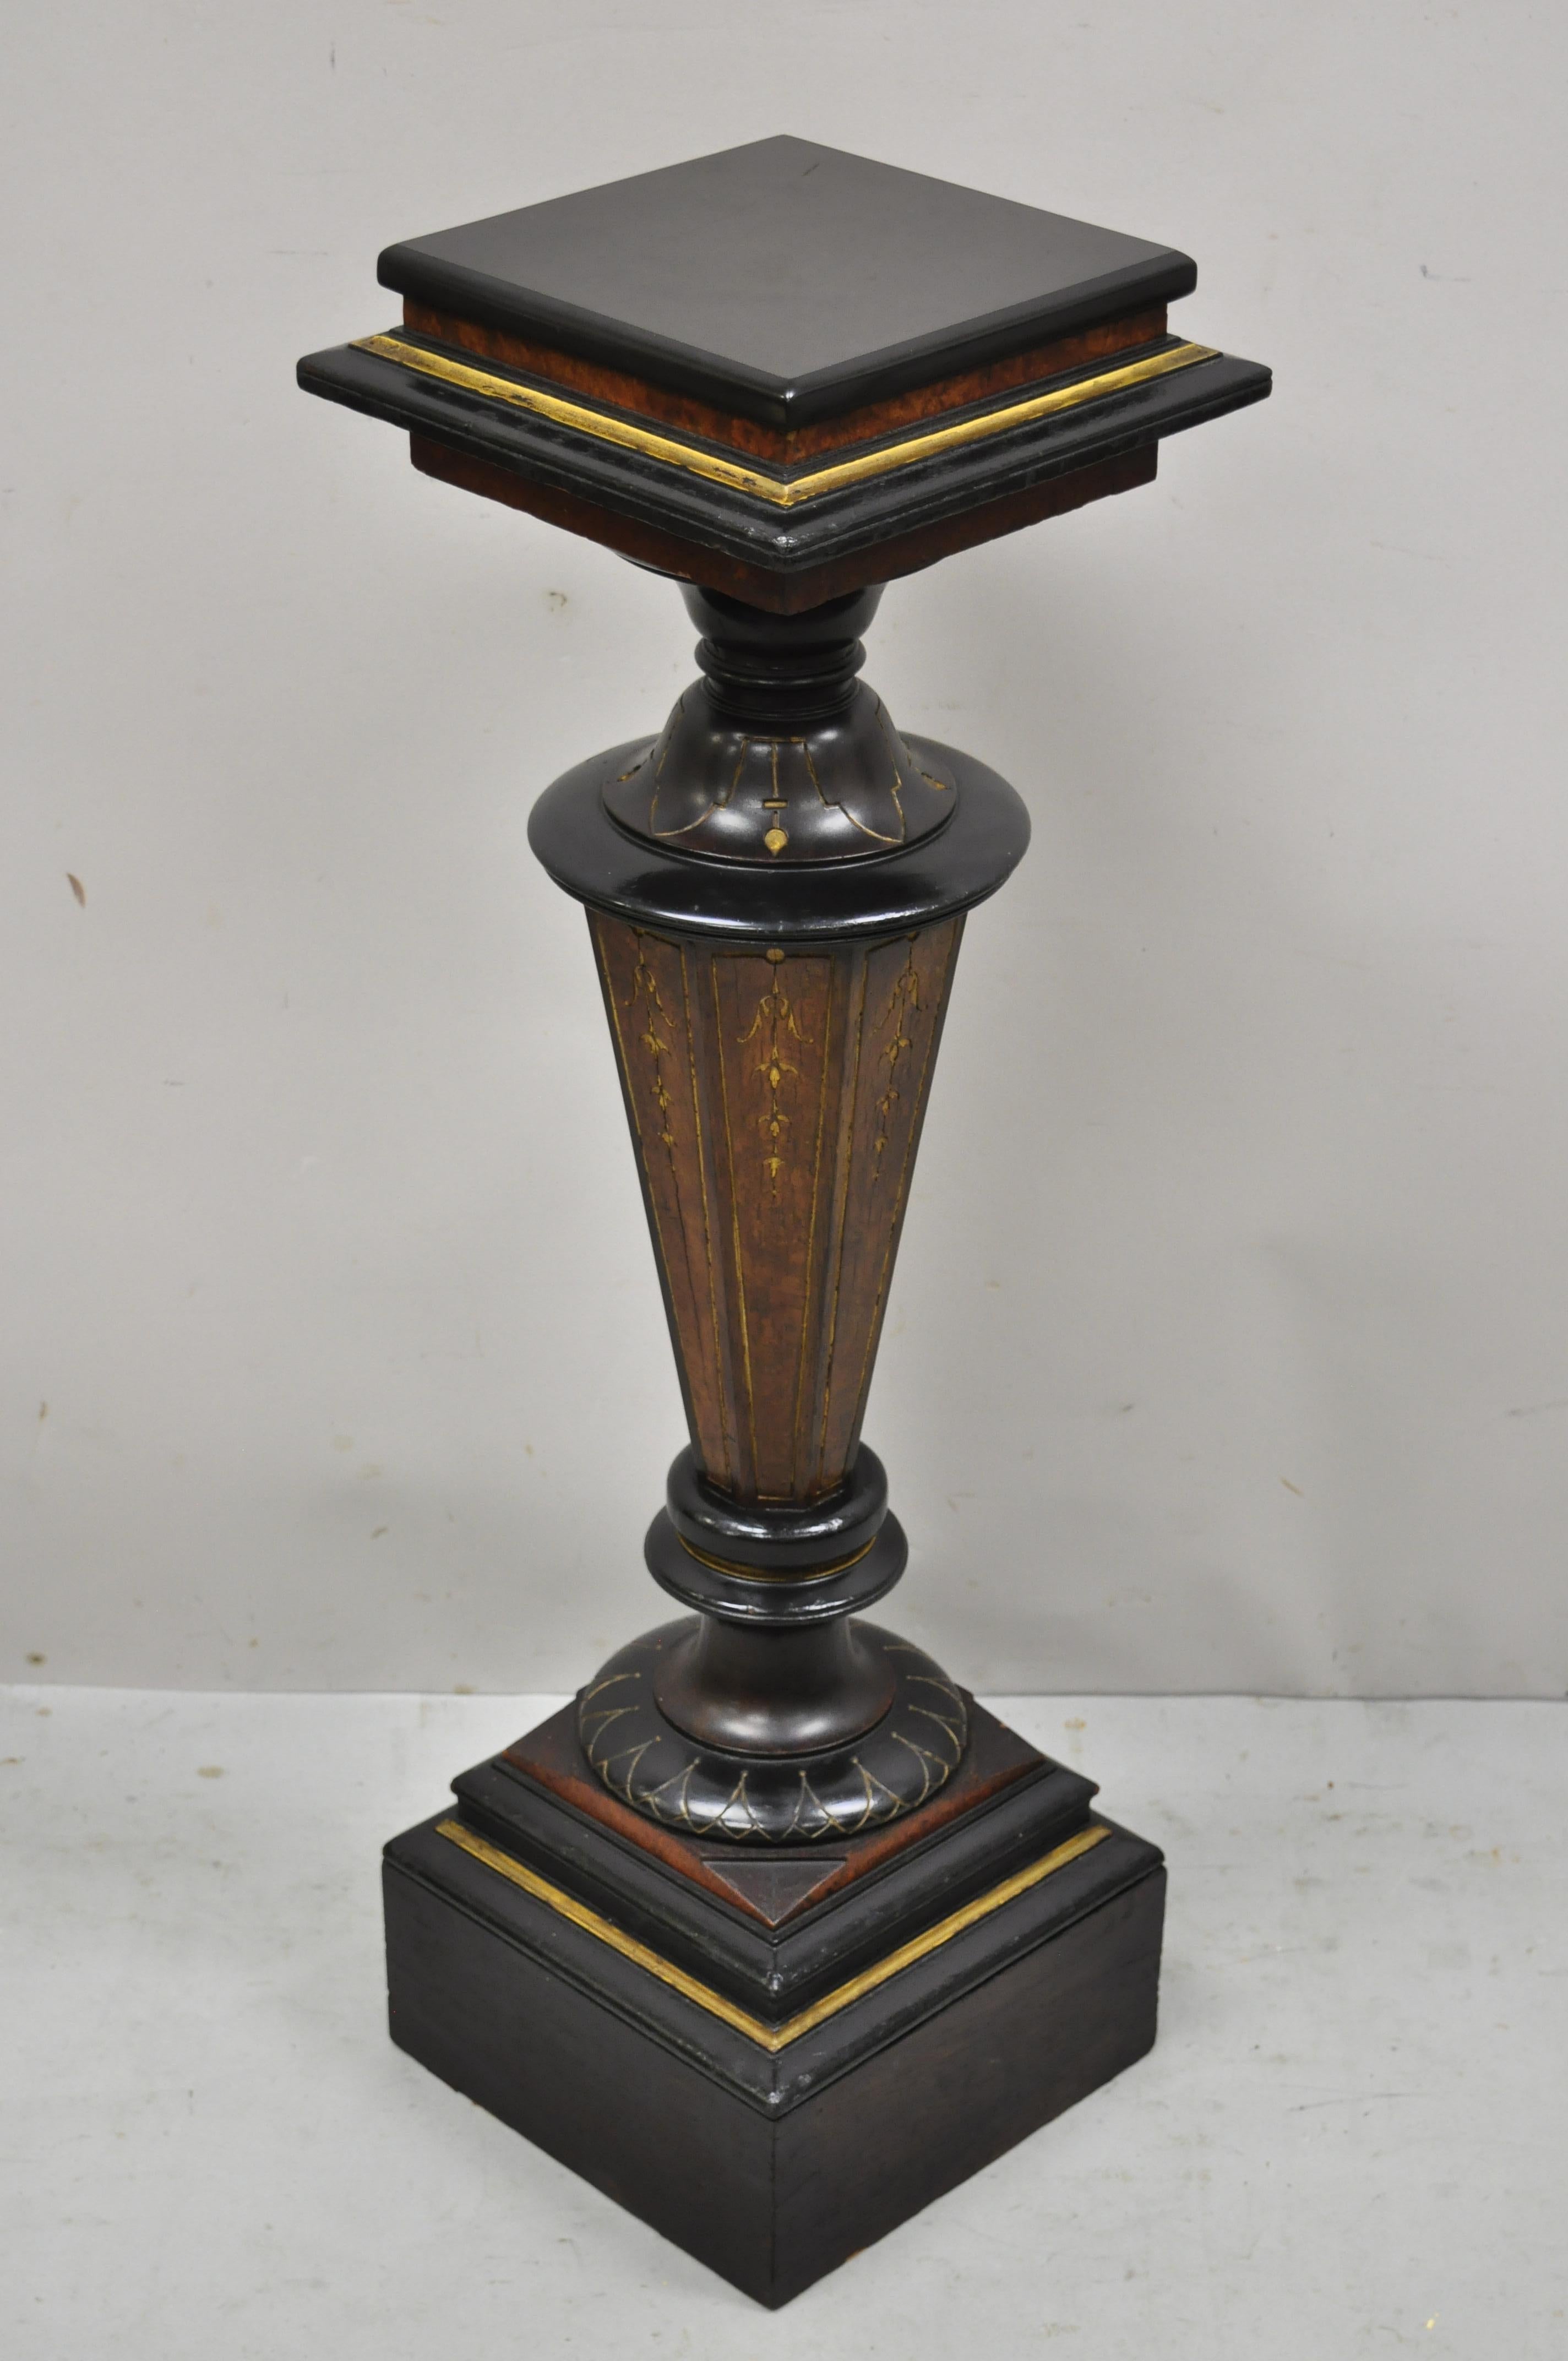 19th century antique ebonized Victorian Aesthetic Movement marble top pedestal plant stand. Item features black square marble top, ebonized and gold gilt painted column, very nice antique item, great style and form. Circa 19th century. Measurements: